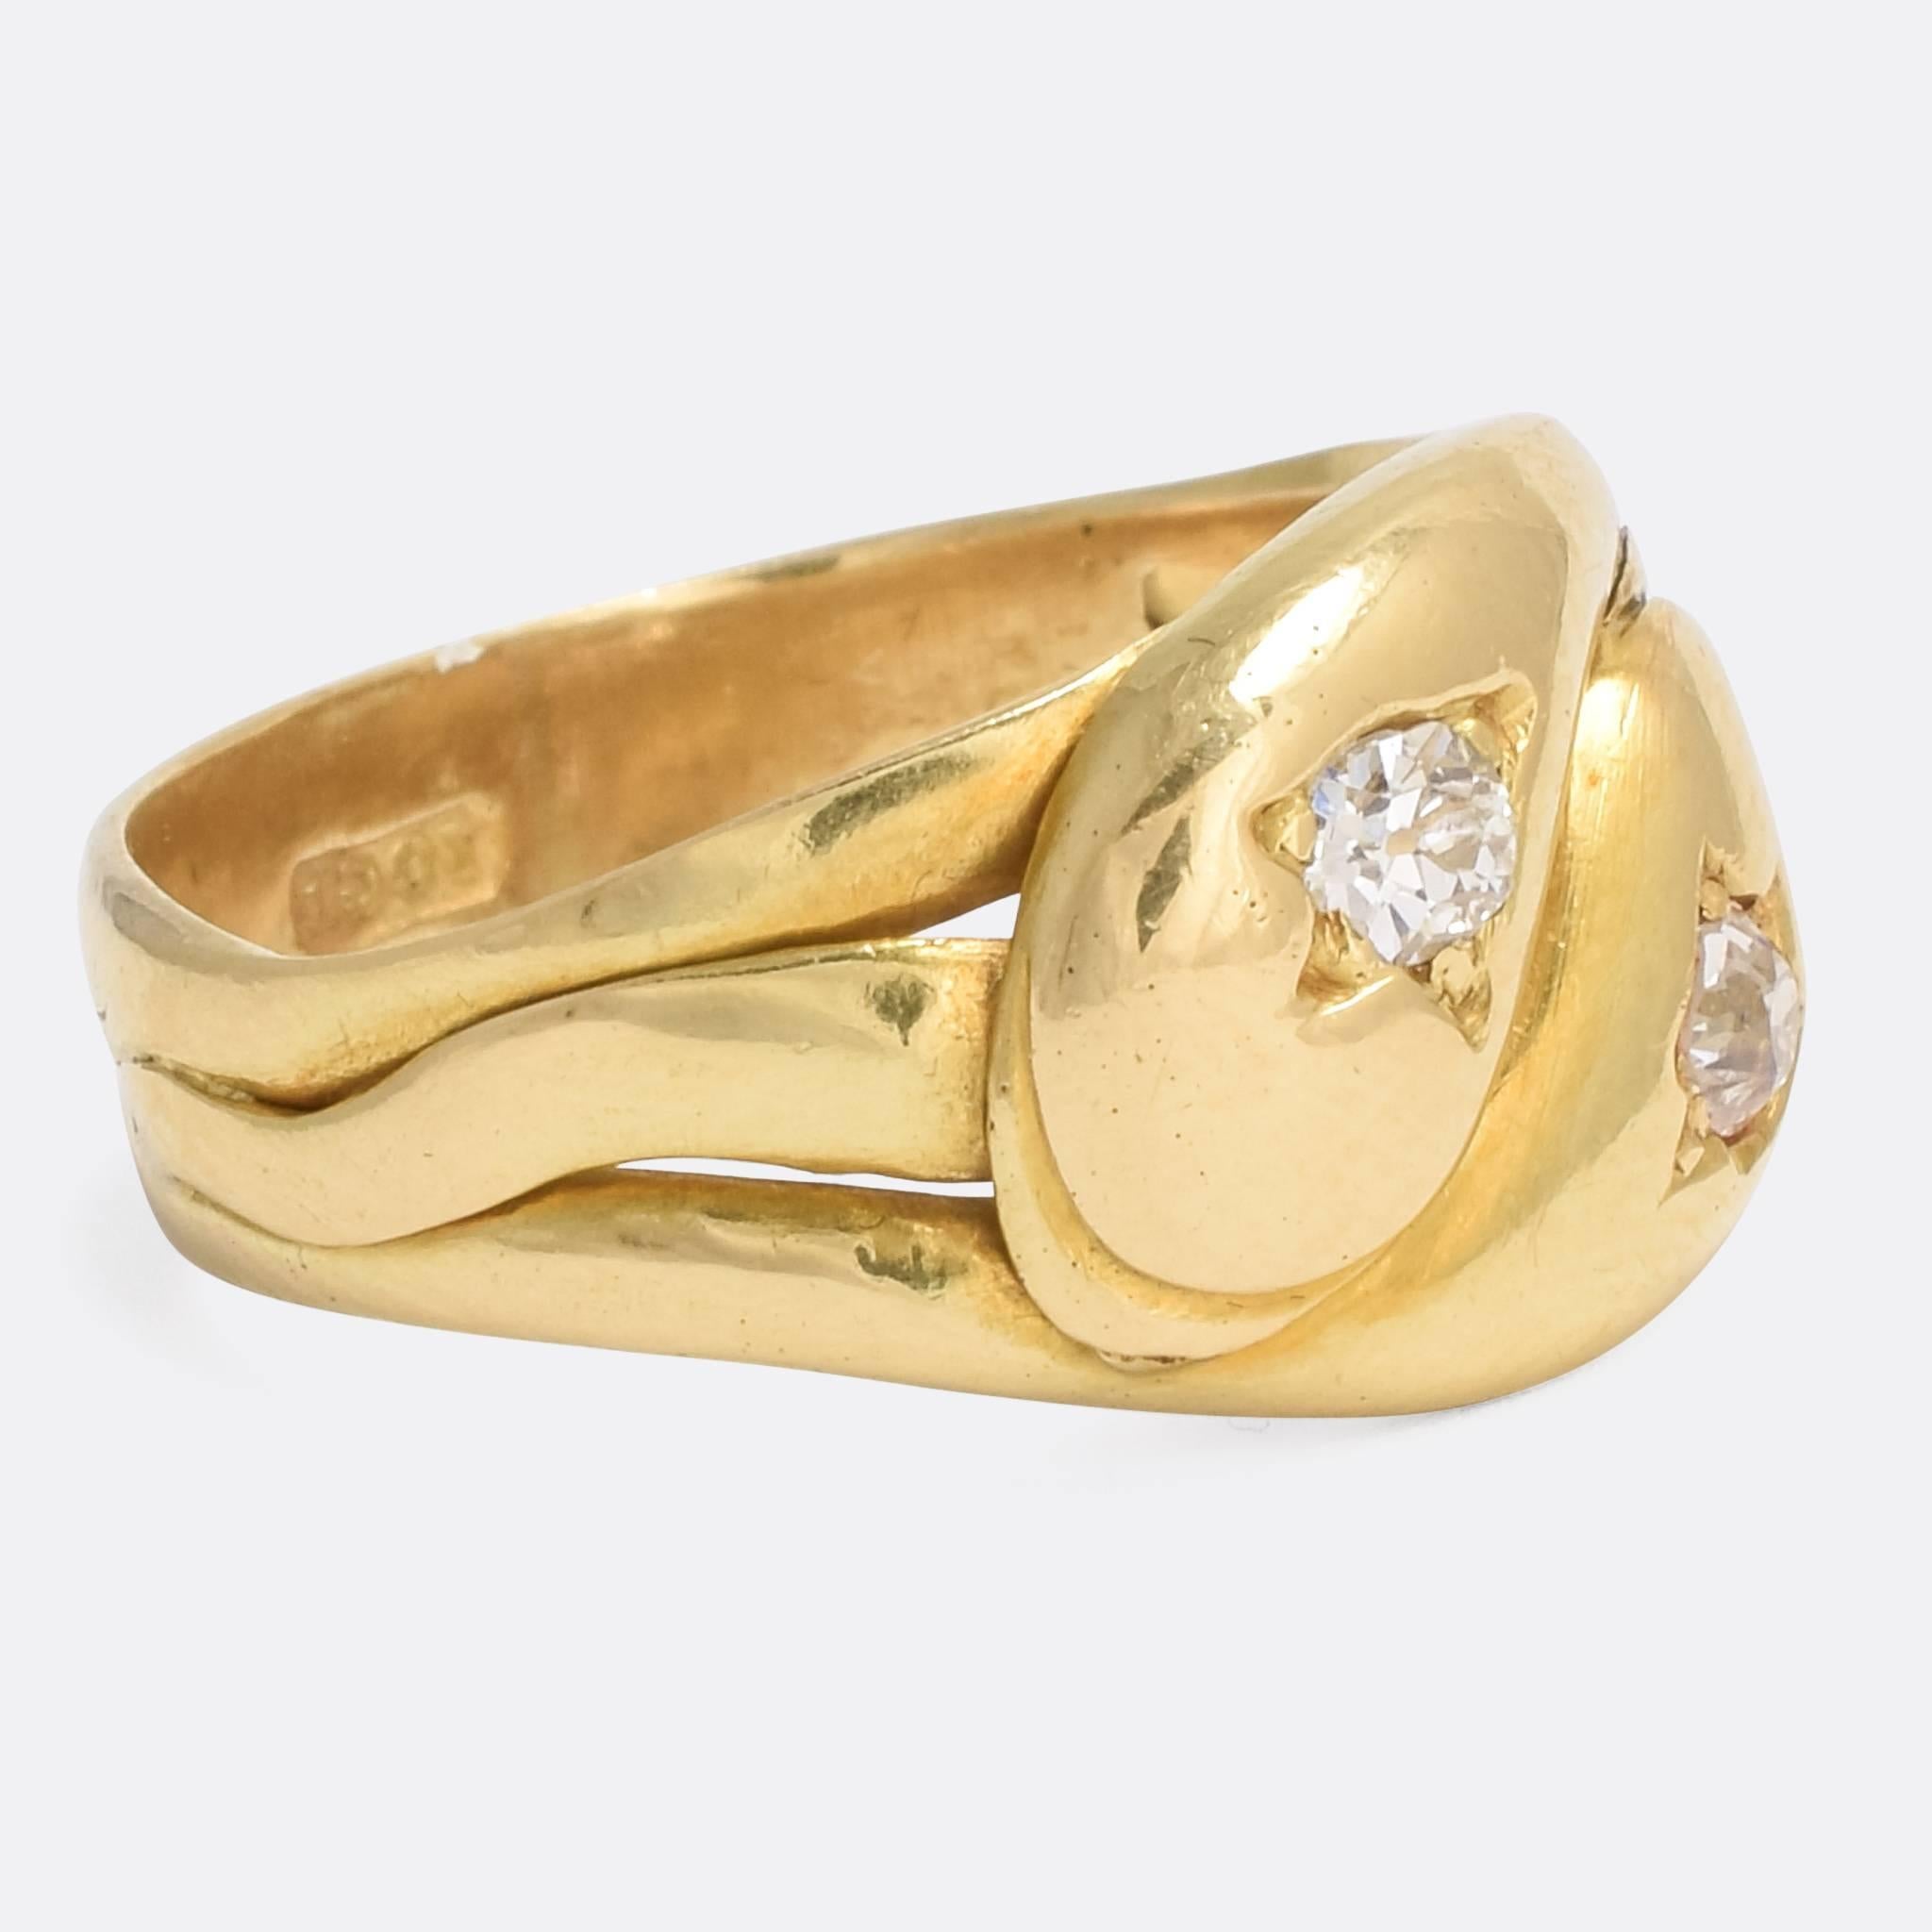 A particularly style Victorian double snake ring, each serpent set with an old mine cut diamond in the head. It's modelled in a rich 18k yellow gold, with stylize 